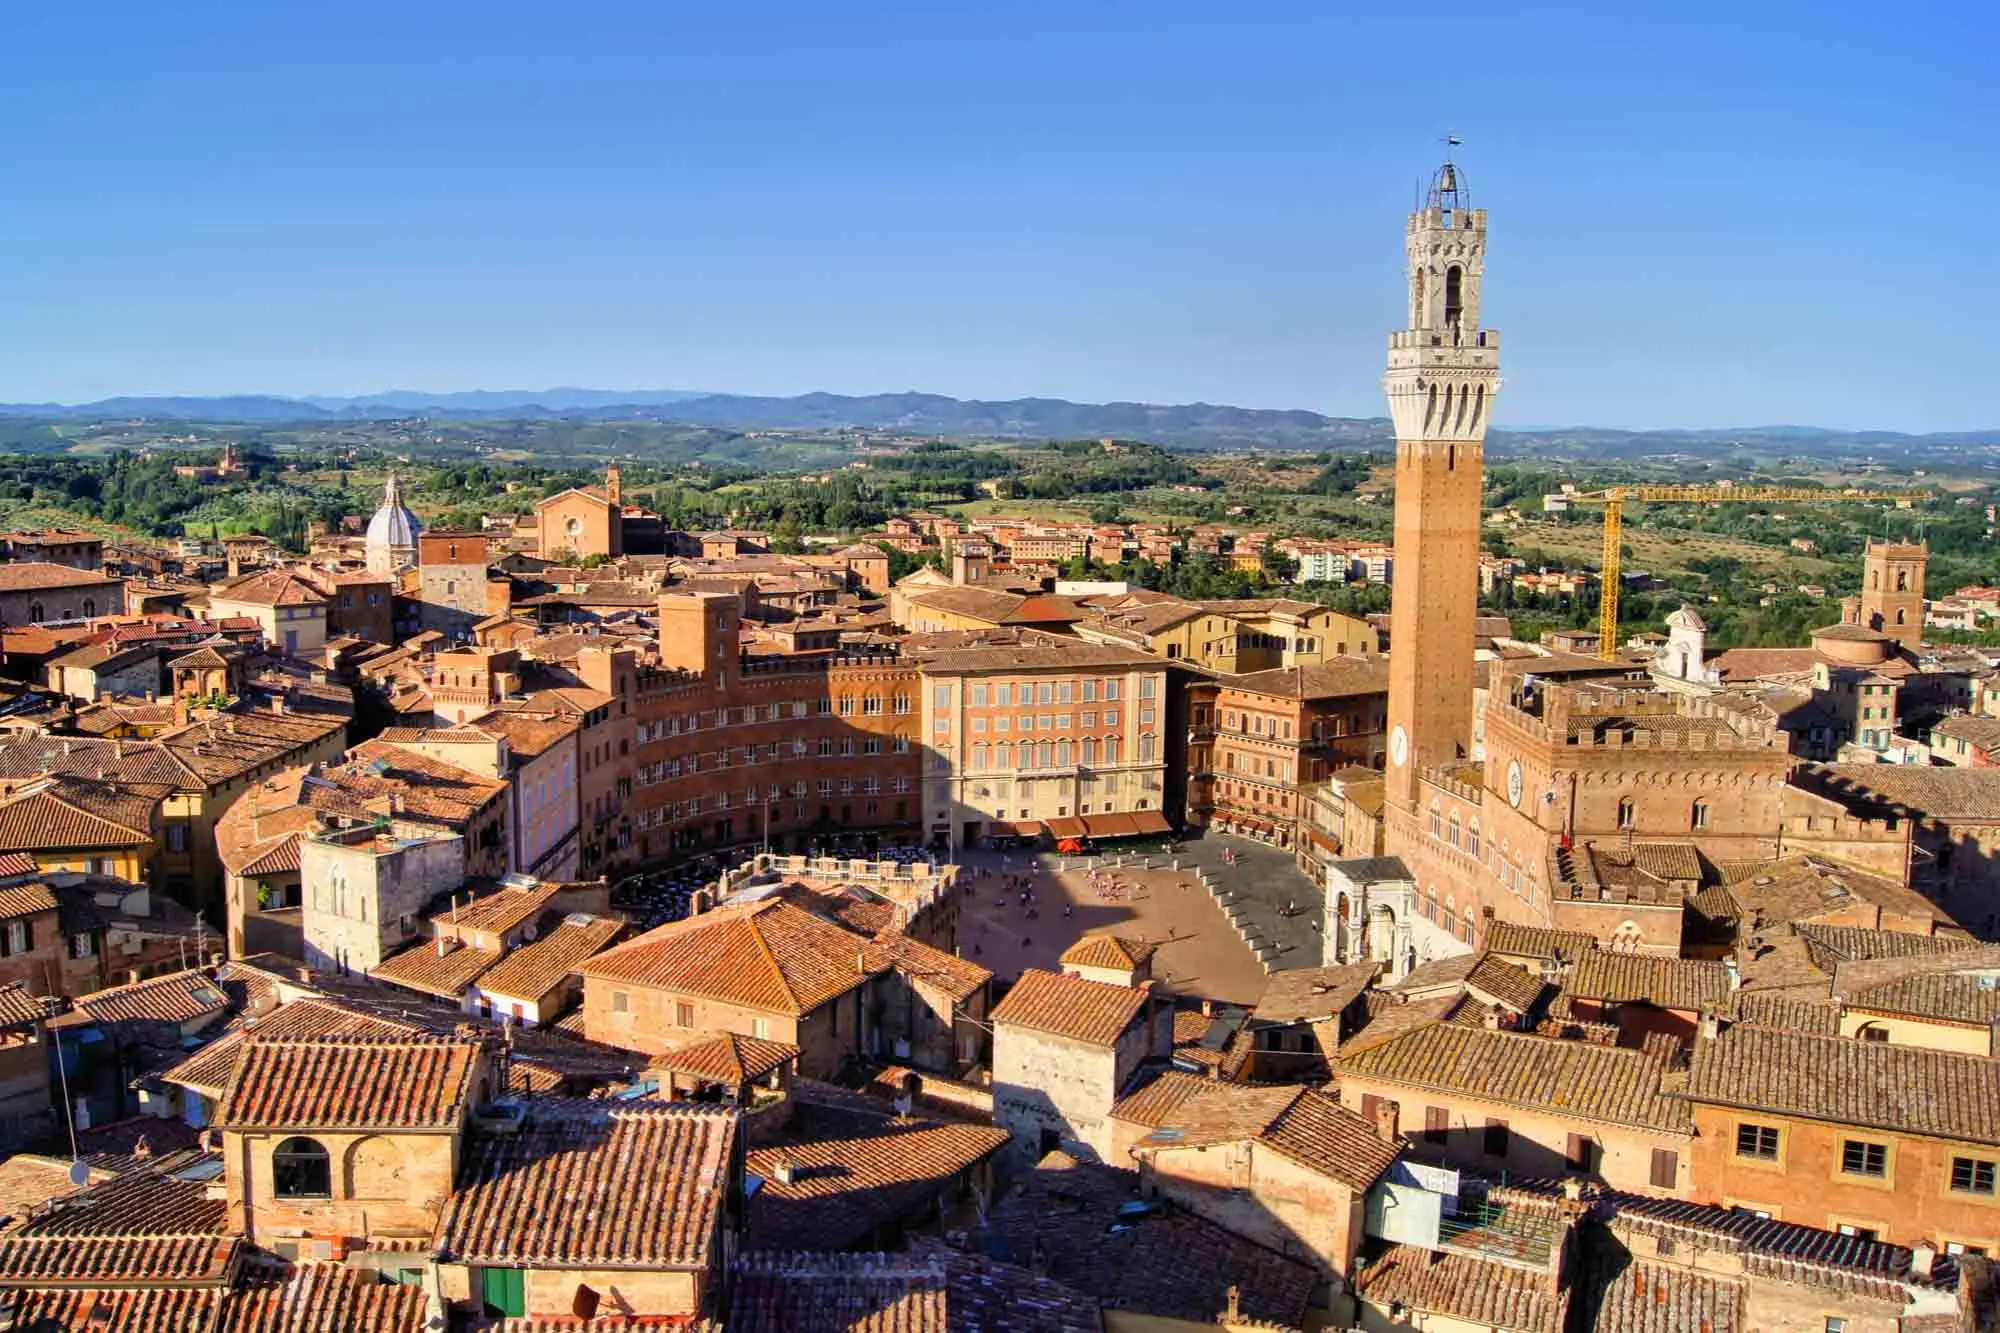 Aerial photo of Piazza del Campo and bell tower in Siena